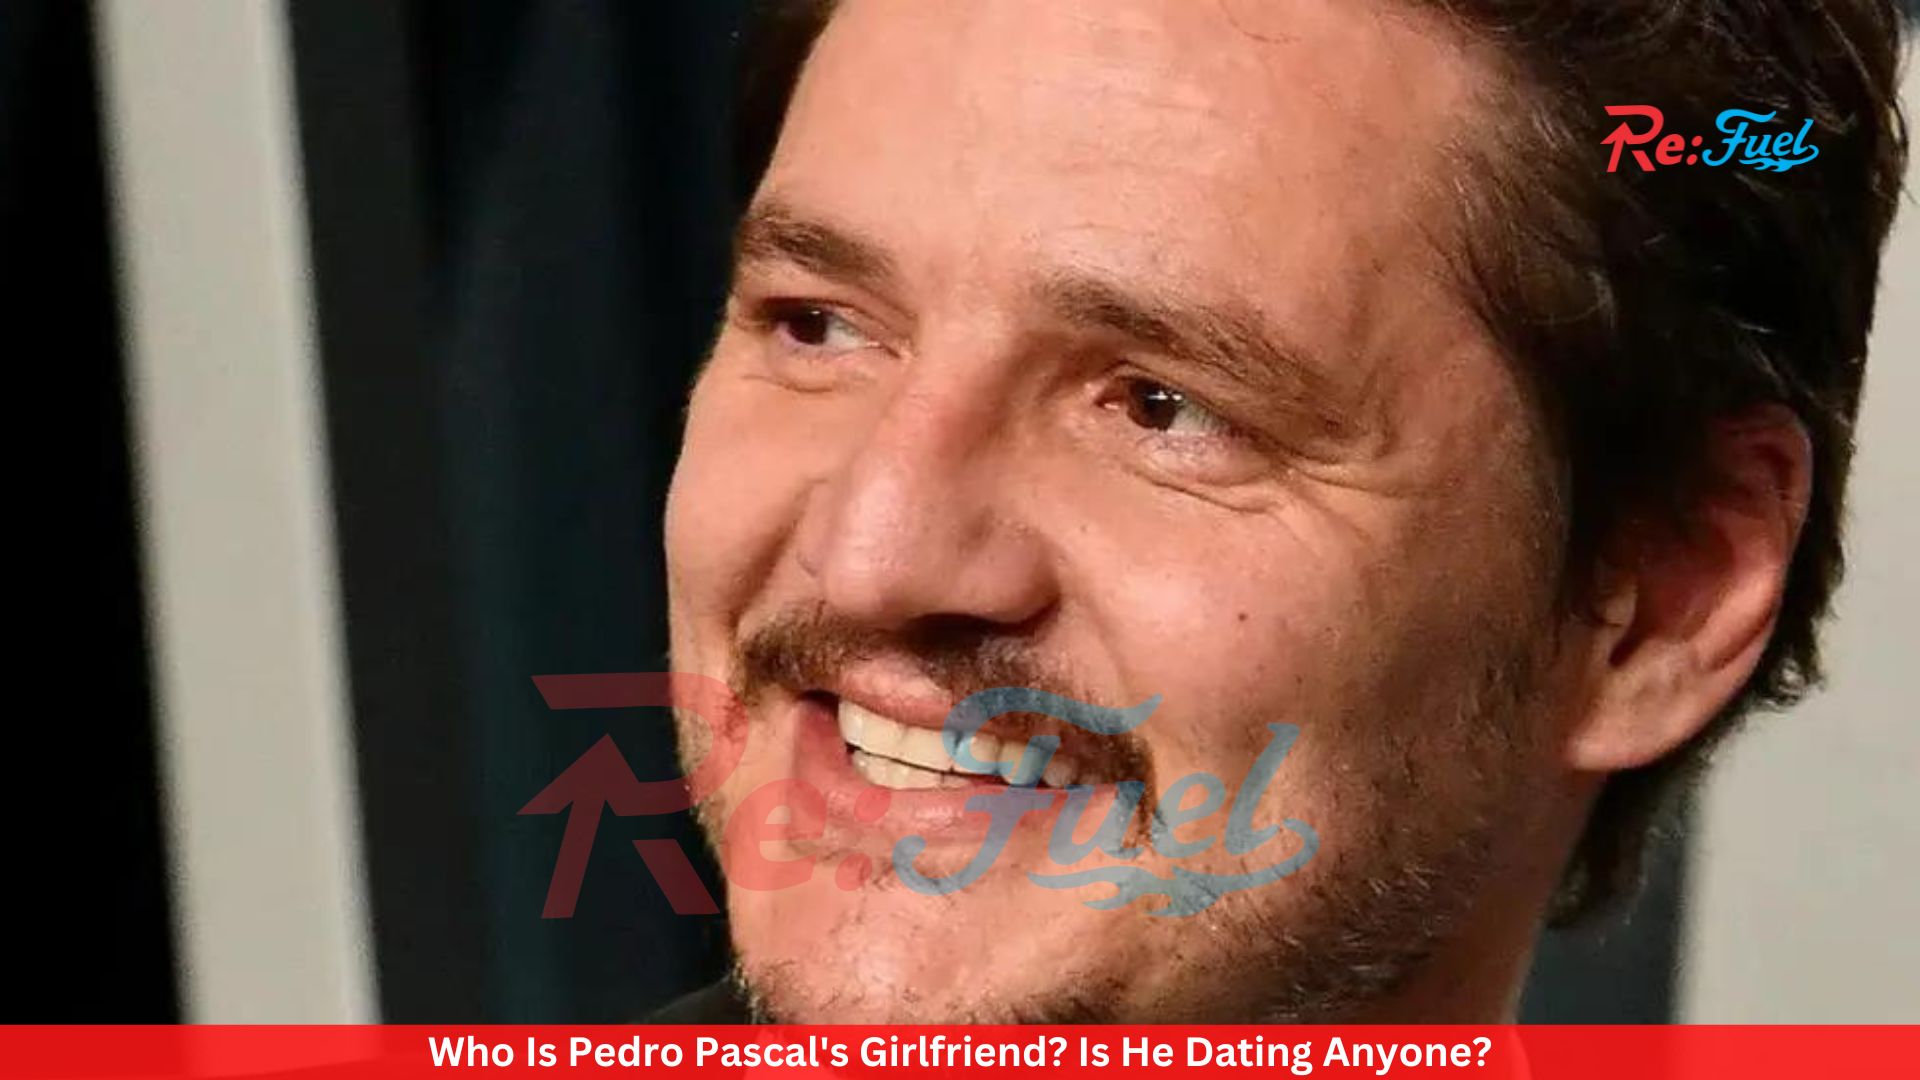 Who Is Pedro Pascal's Girlfriend? Is He Dating Anyone?